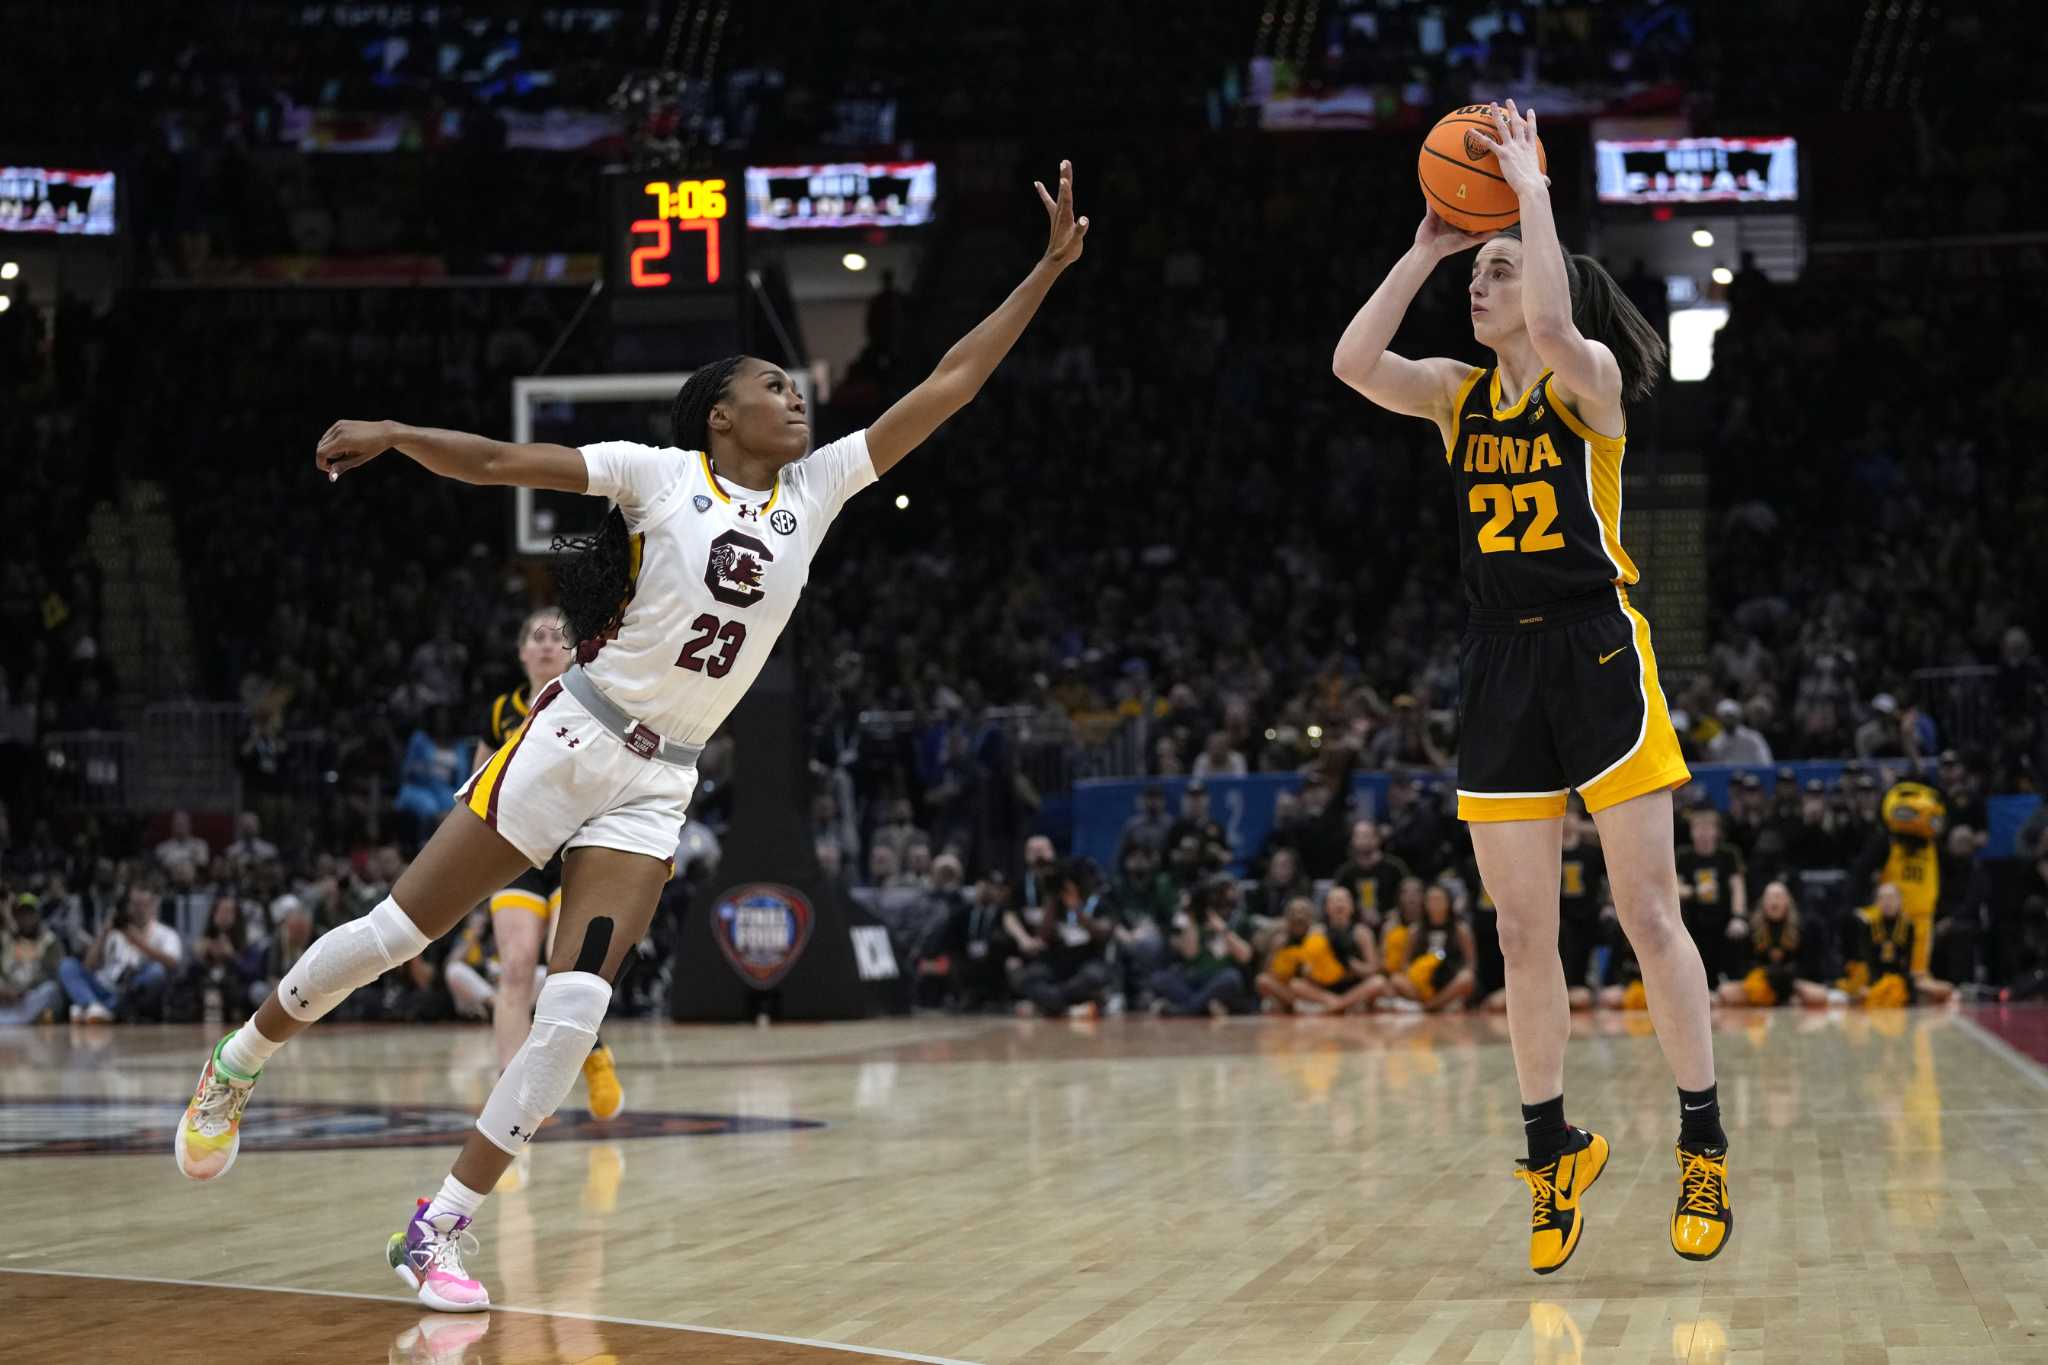 Caitlin Clark and Indiana Fever to have most national appearances on